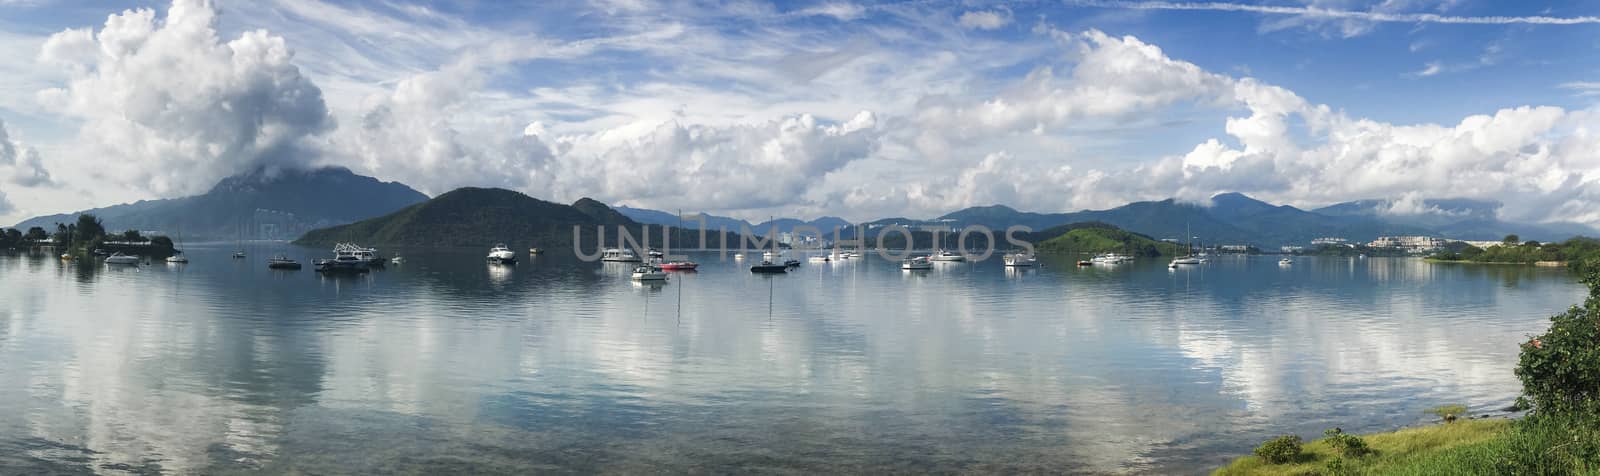 Panorama landscape photography, mountain, cloudscape, boats on l by cougarsan